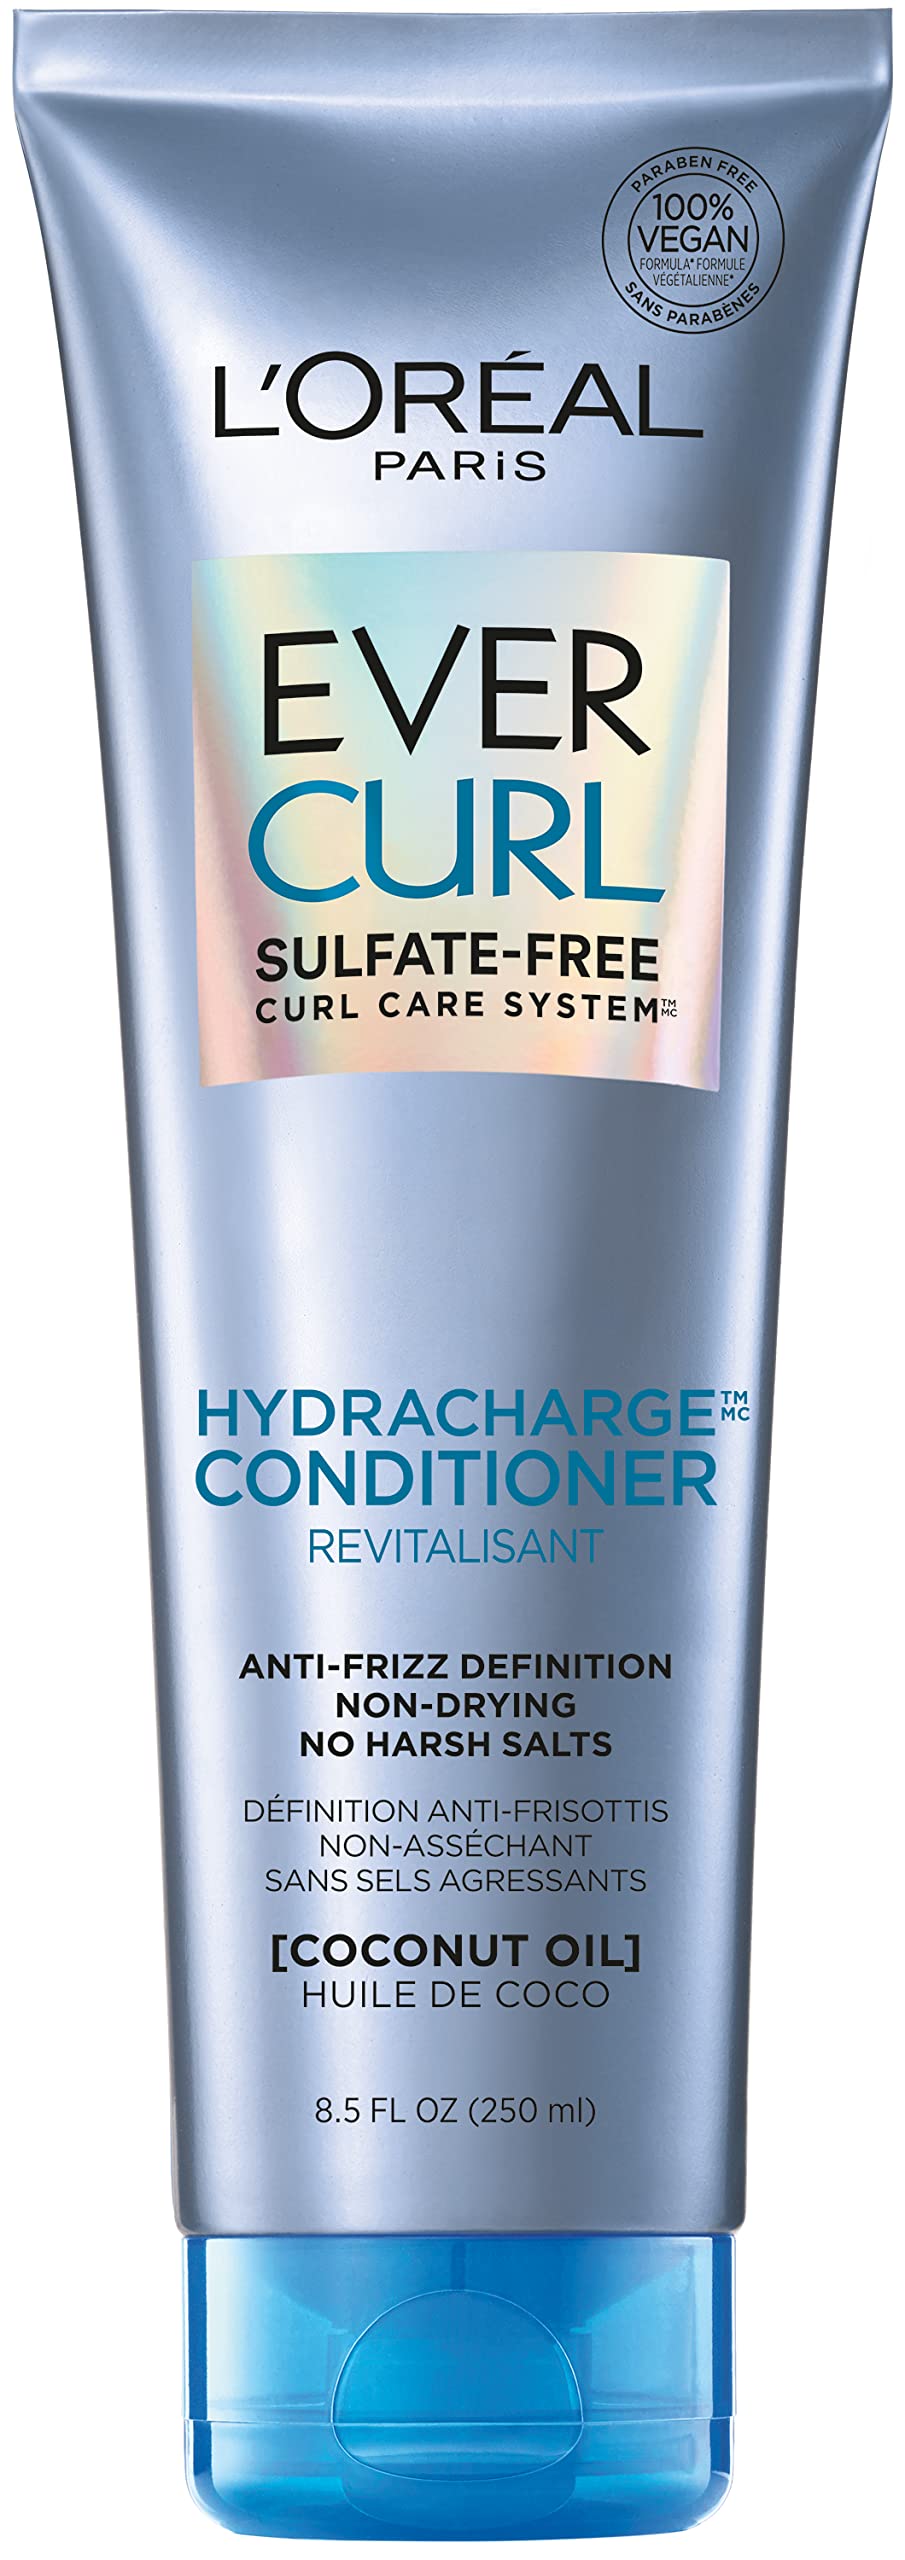 EverCurl Hydracharge Conditioner for Curly Hair. Vegan. Sulfate-free, paraben-free, silicone-free, free of harsh salts. With Coconut Oil., 250 ml (Pack of 1)